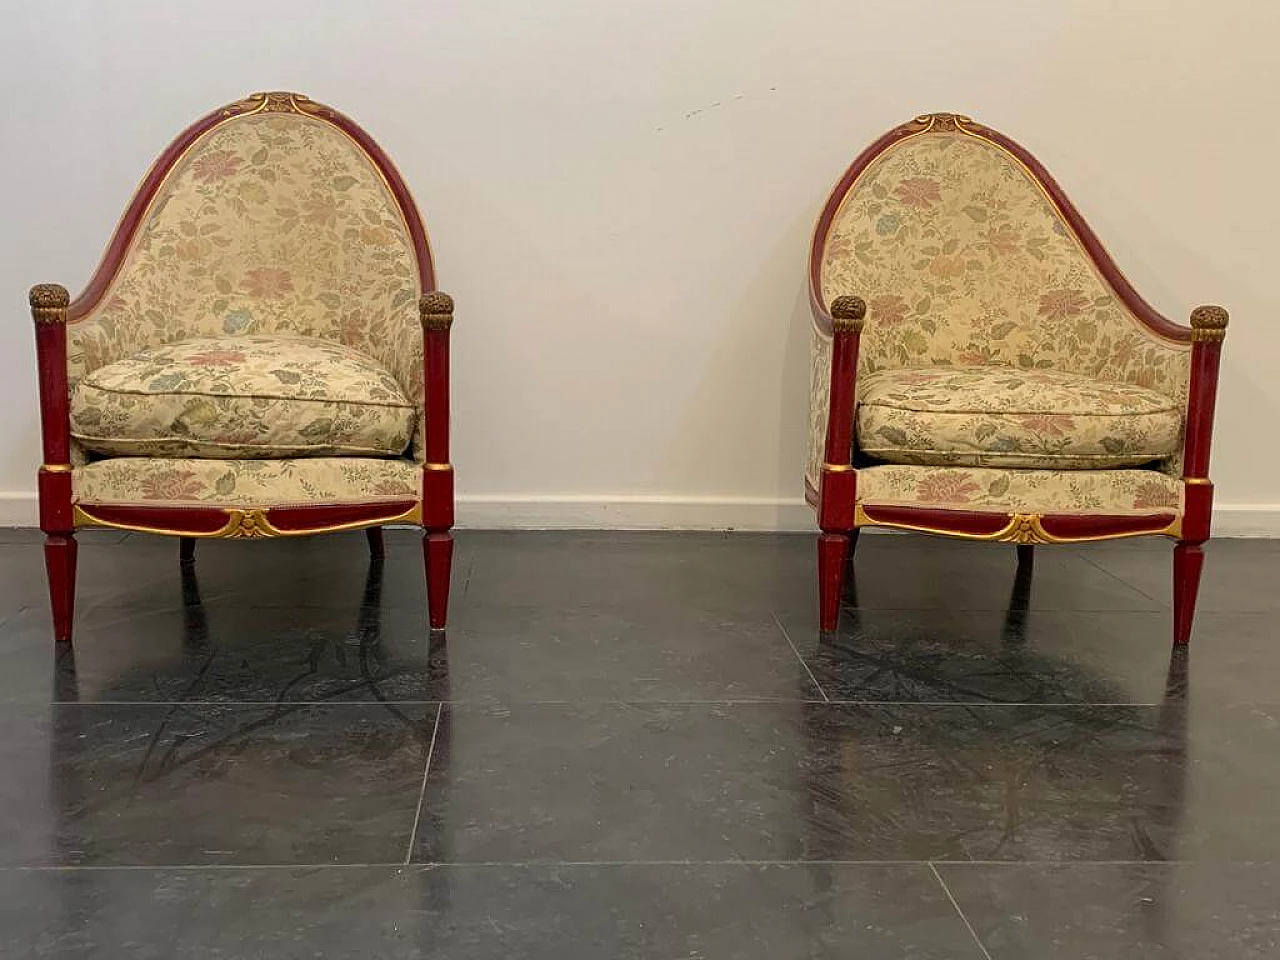 Pair of Art Deco red lacquered armchairs with carved details, 1930s 1444157